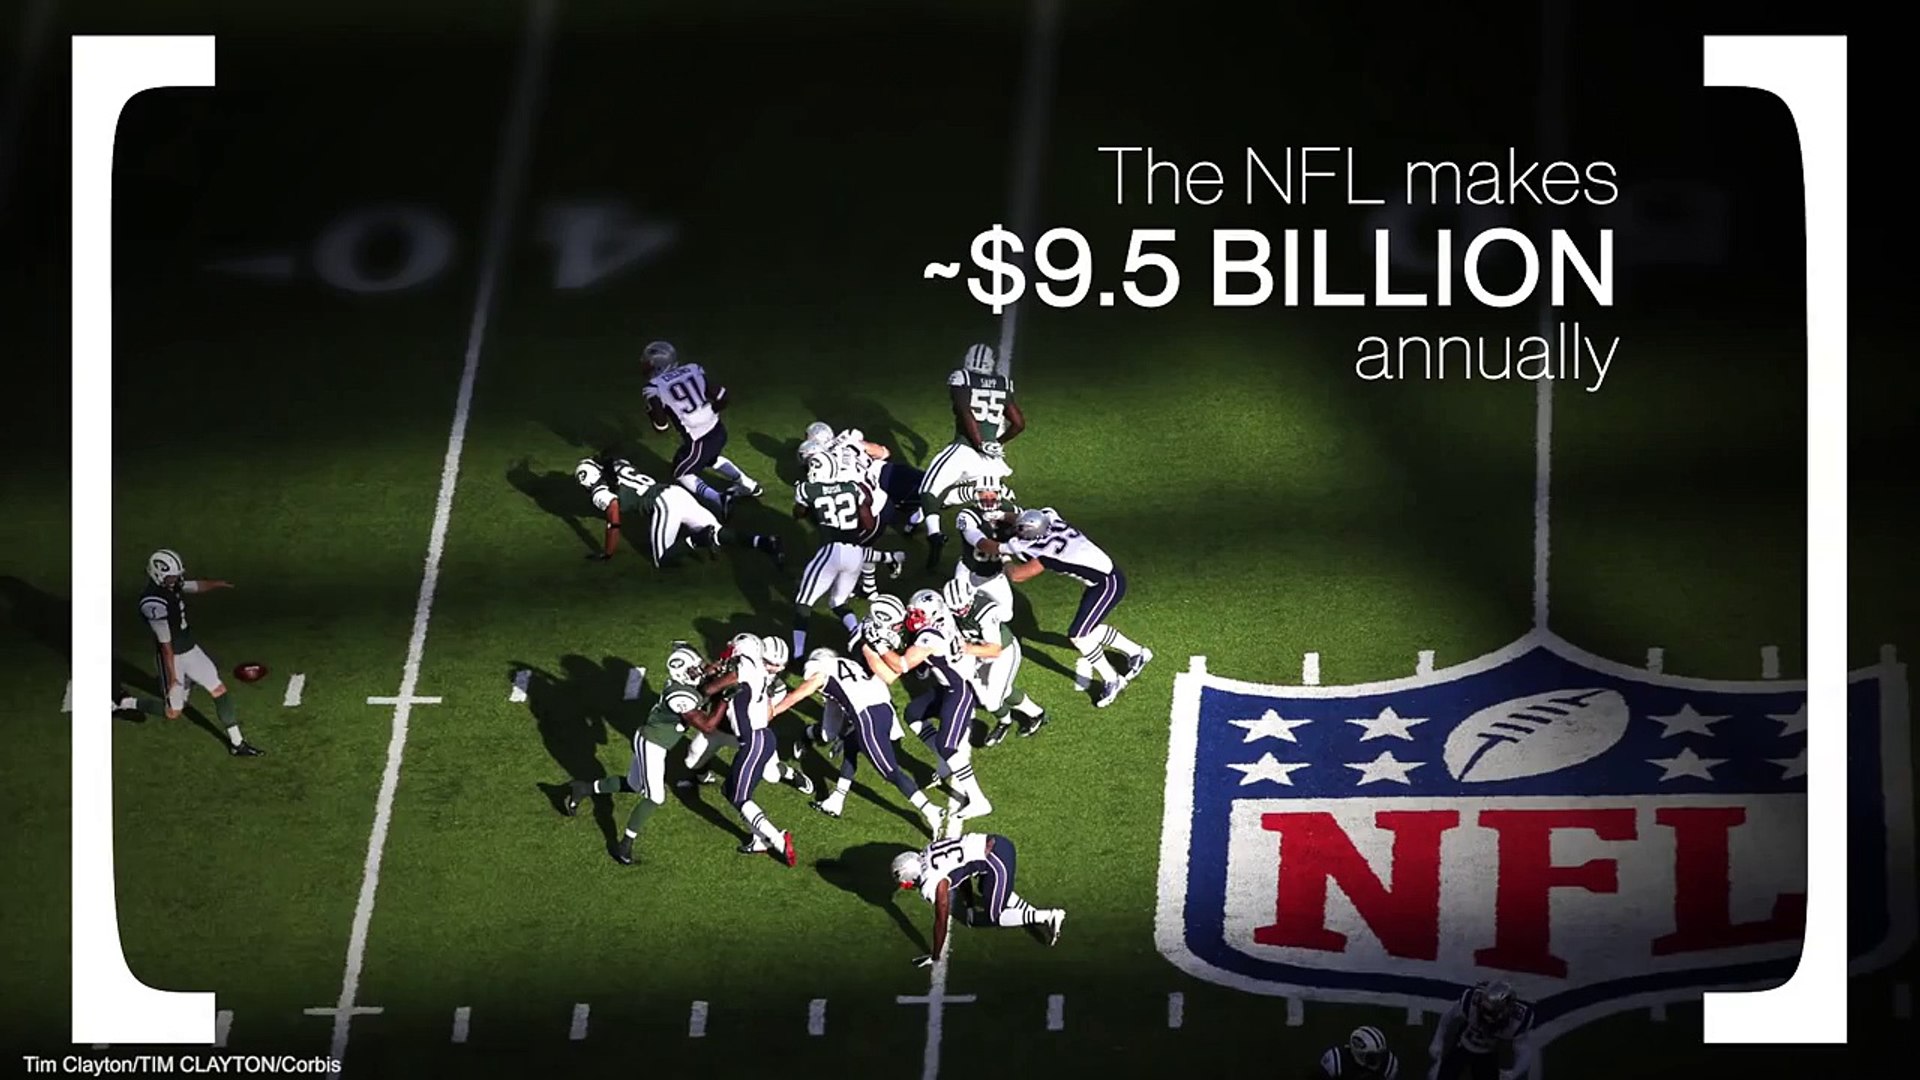 Why is the NFL a Non-Profit?